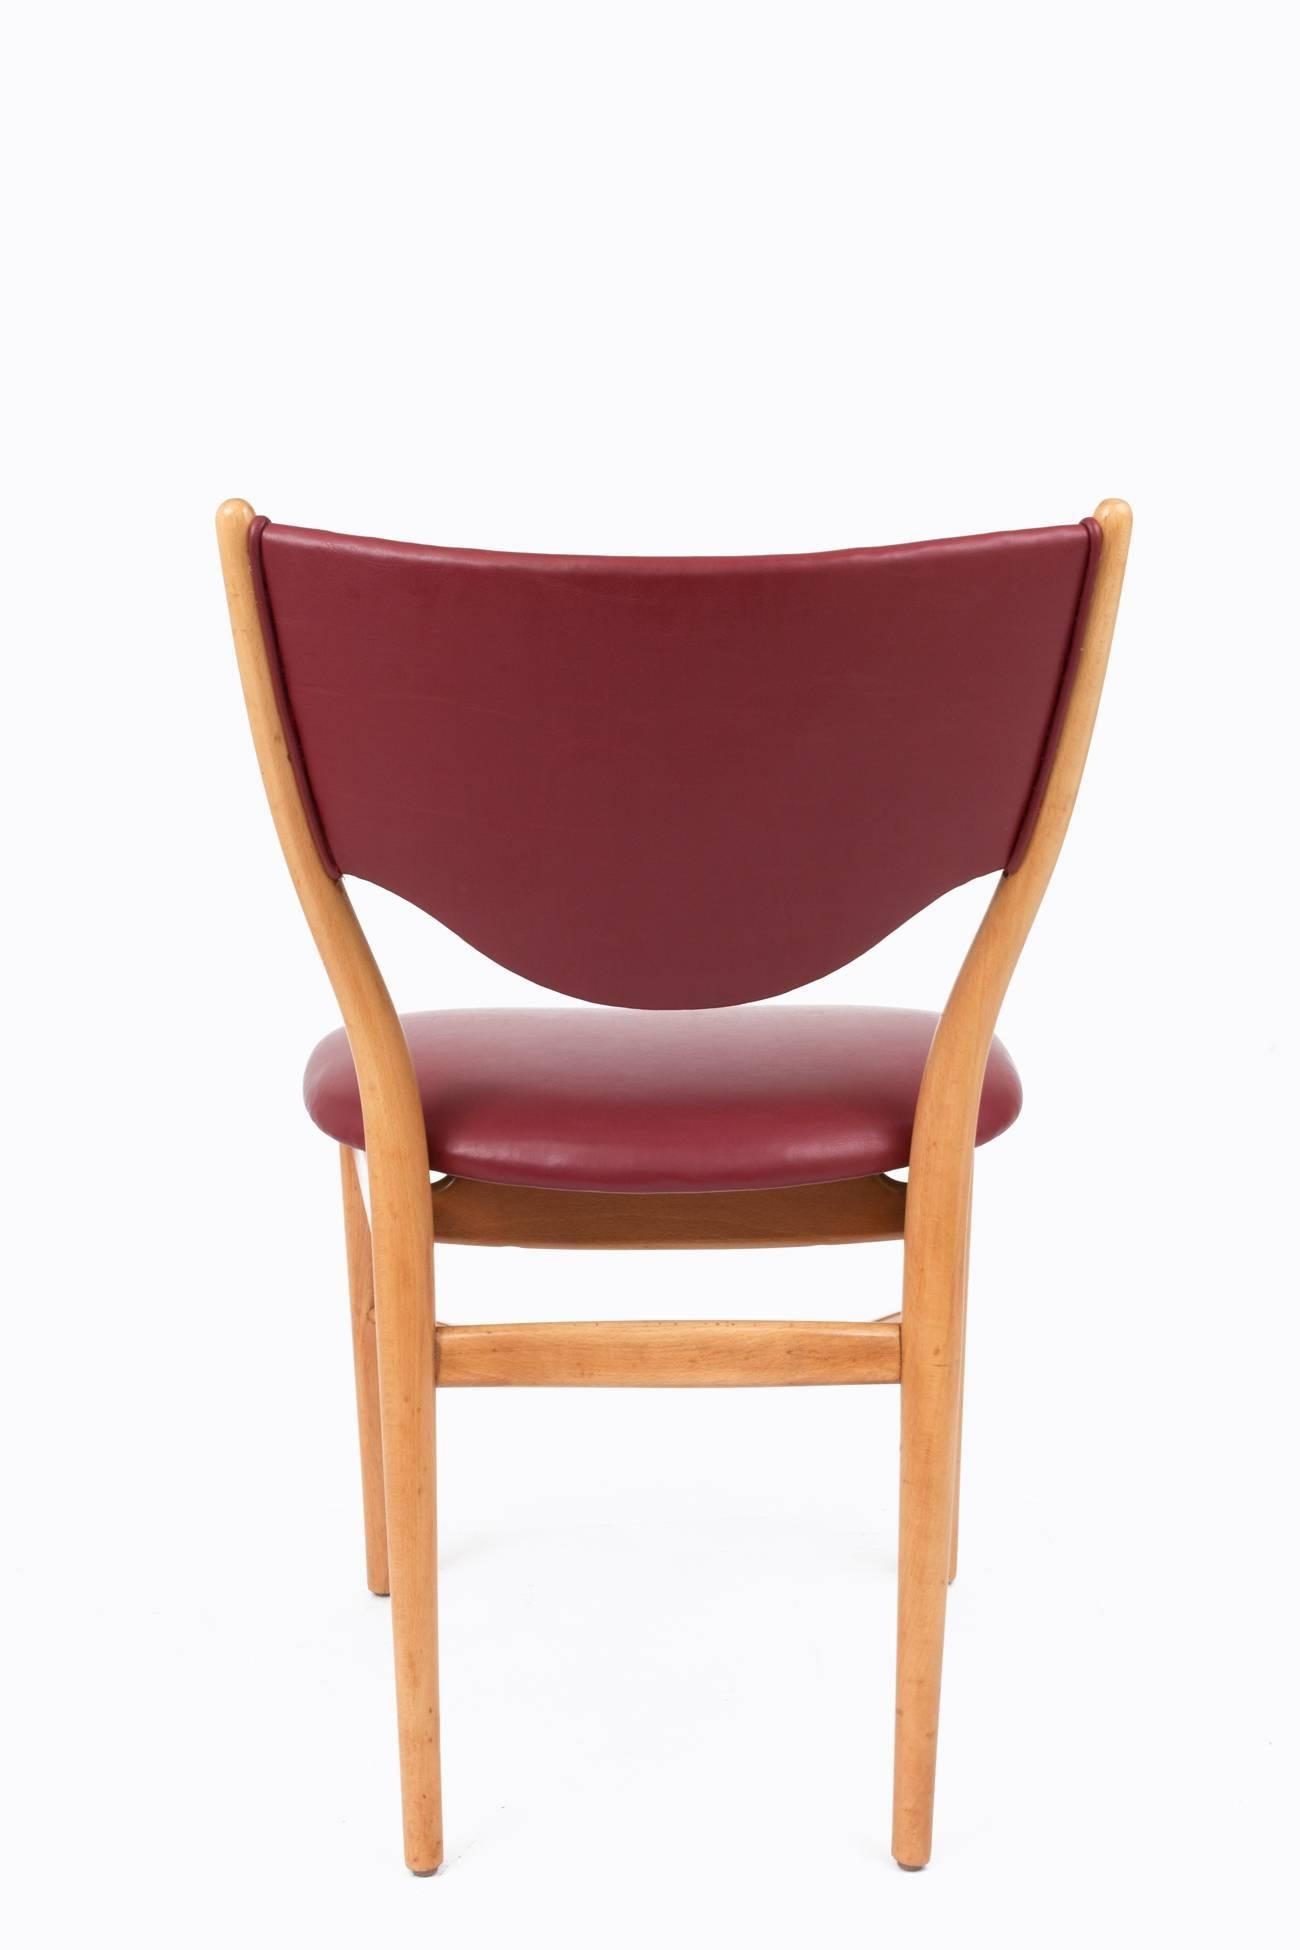 Mid-20th Century Finn Juhl Sinuous Set of Six Red Dining Chairs in Beech & Leather, Denmark 1950s